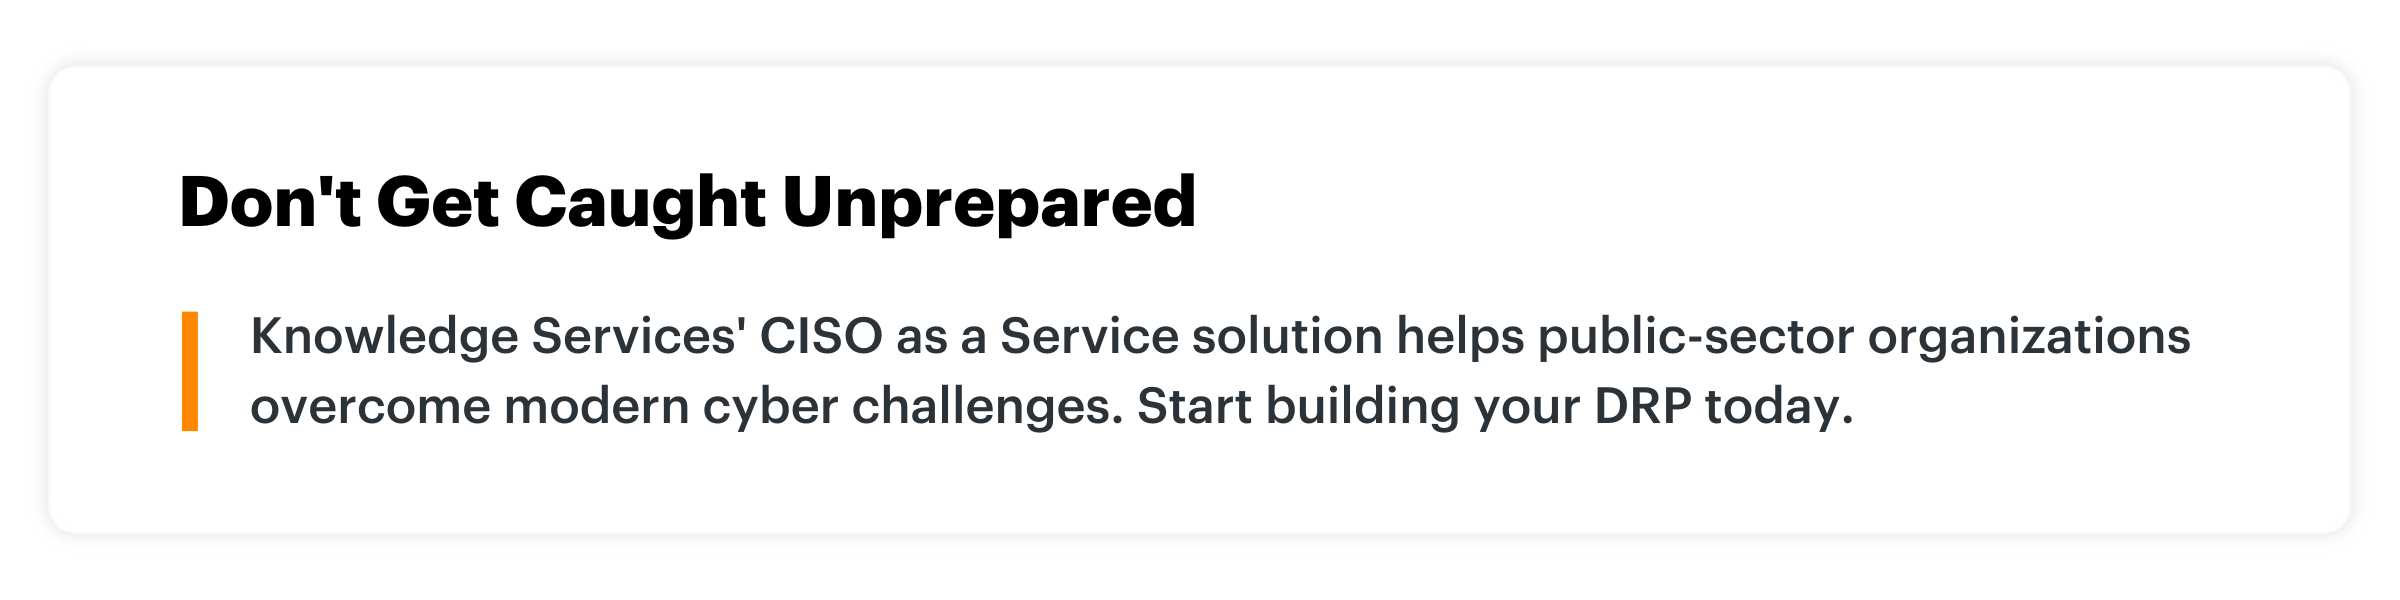 Block quote graphic with title "Don't Get Caught Unprepared" and content "Knowledge Services' CISO as a Service solution helps public-sector organizations overcome modern cyber challenges. Start building your DRP today."